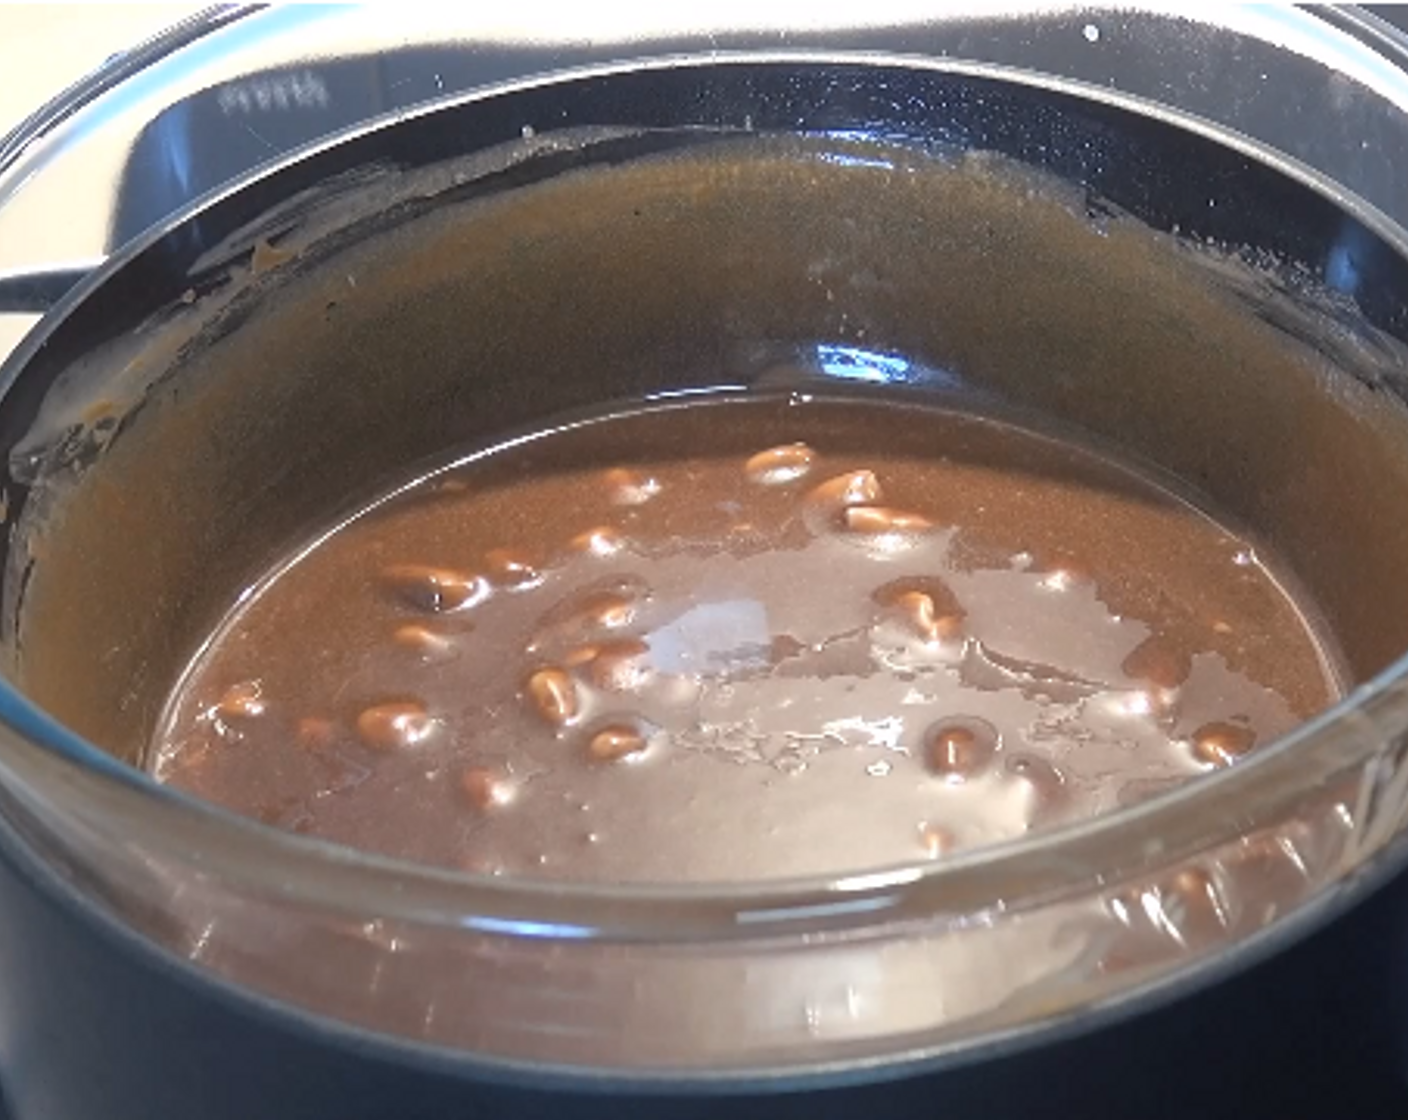 step 2 When the bars are completely melted and mixed with the cream, turn off the heat, carefully remove bowl from saucepan and let cool for 10 - 15 minutes.